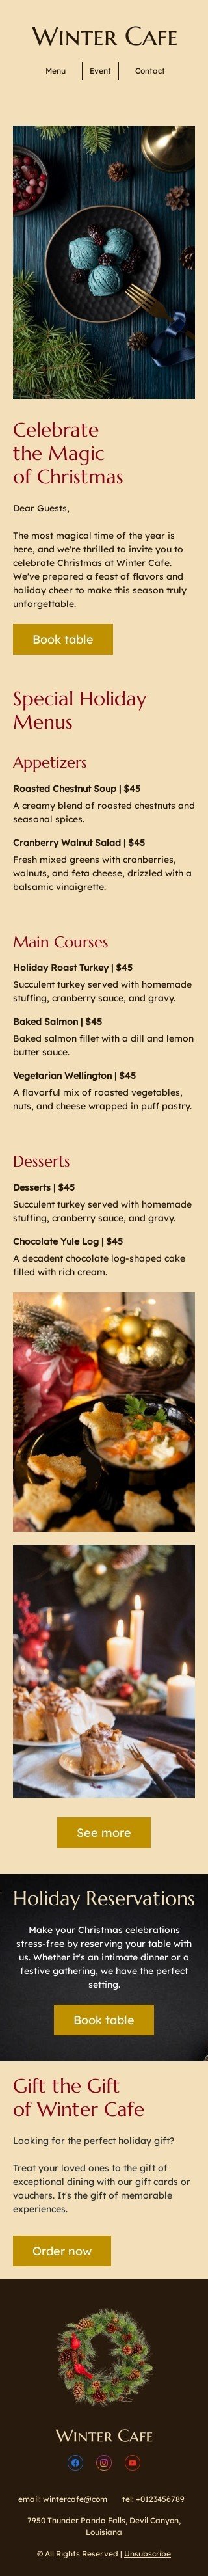 Christmas email template "Celebrate the magic of Christmas" for restaurants industry mobile view